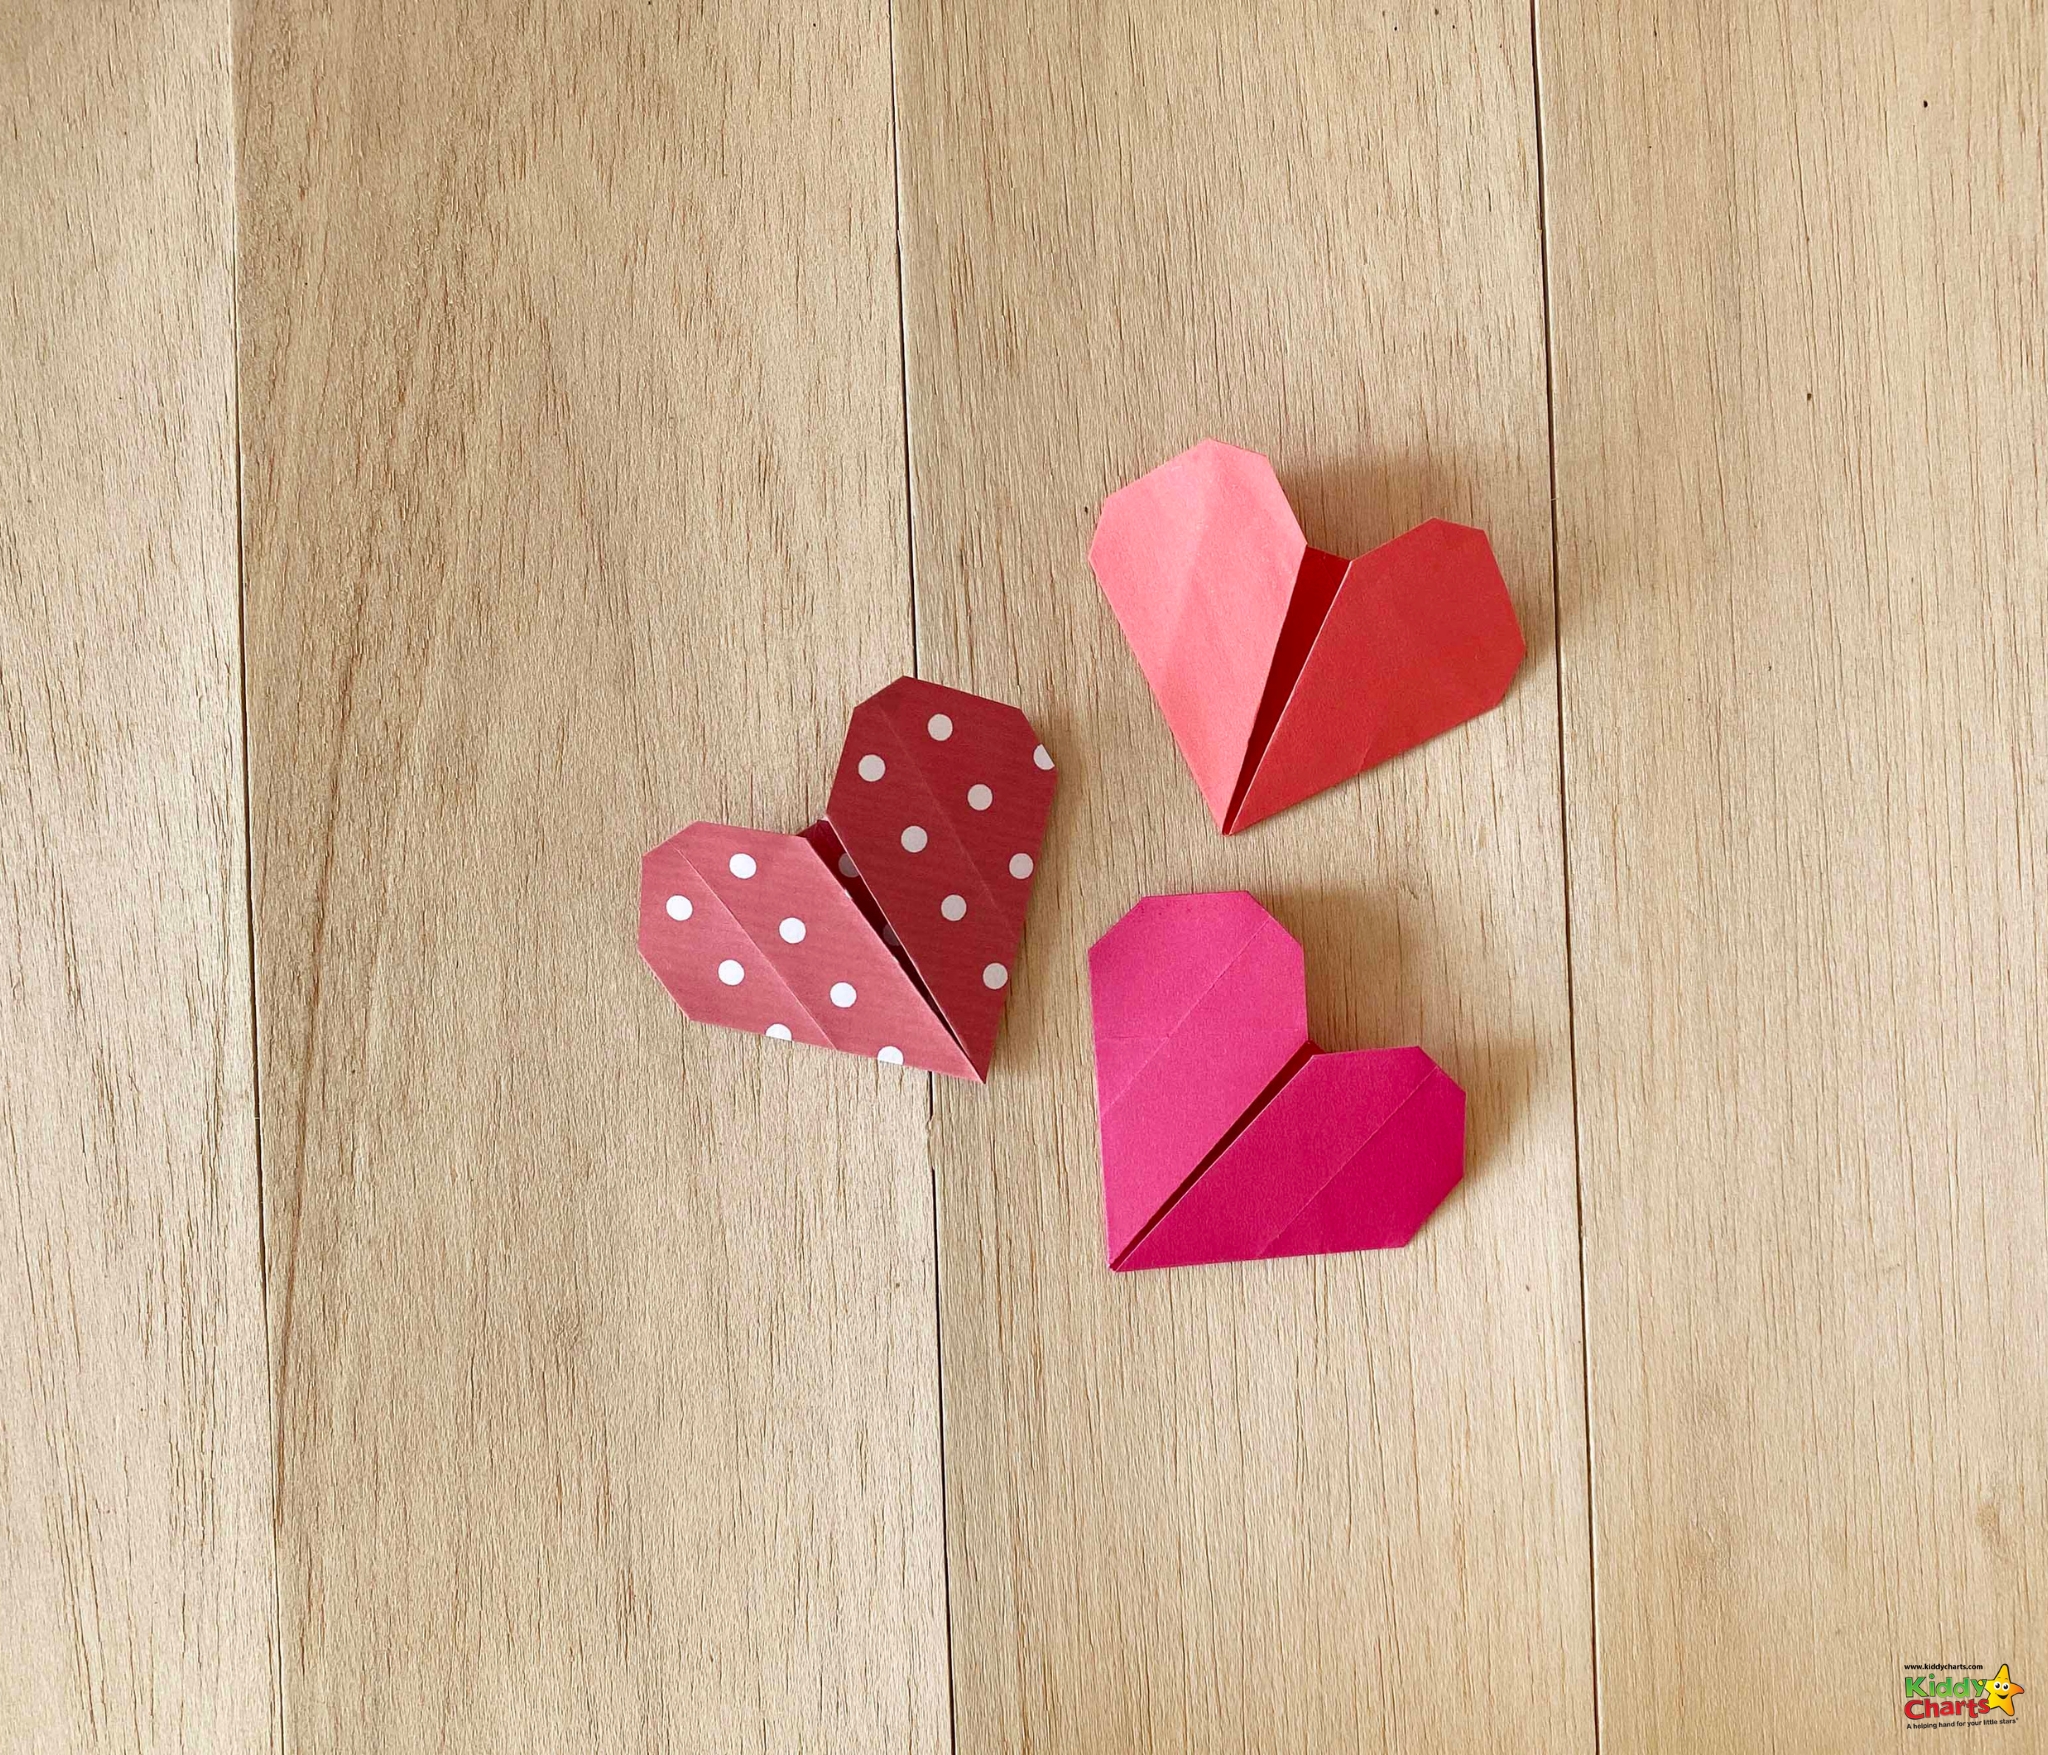 A child is crafting a pink heart out of art and construction paper for Valentine's Day.